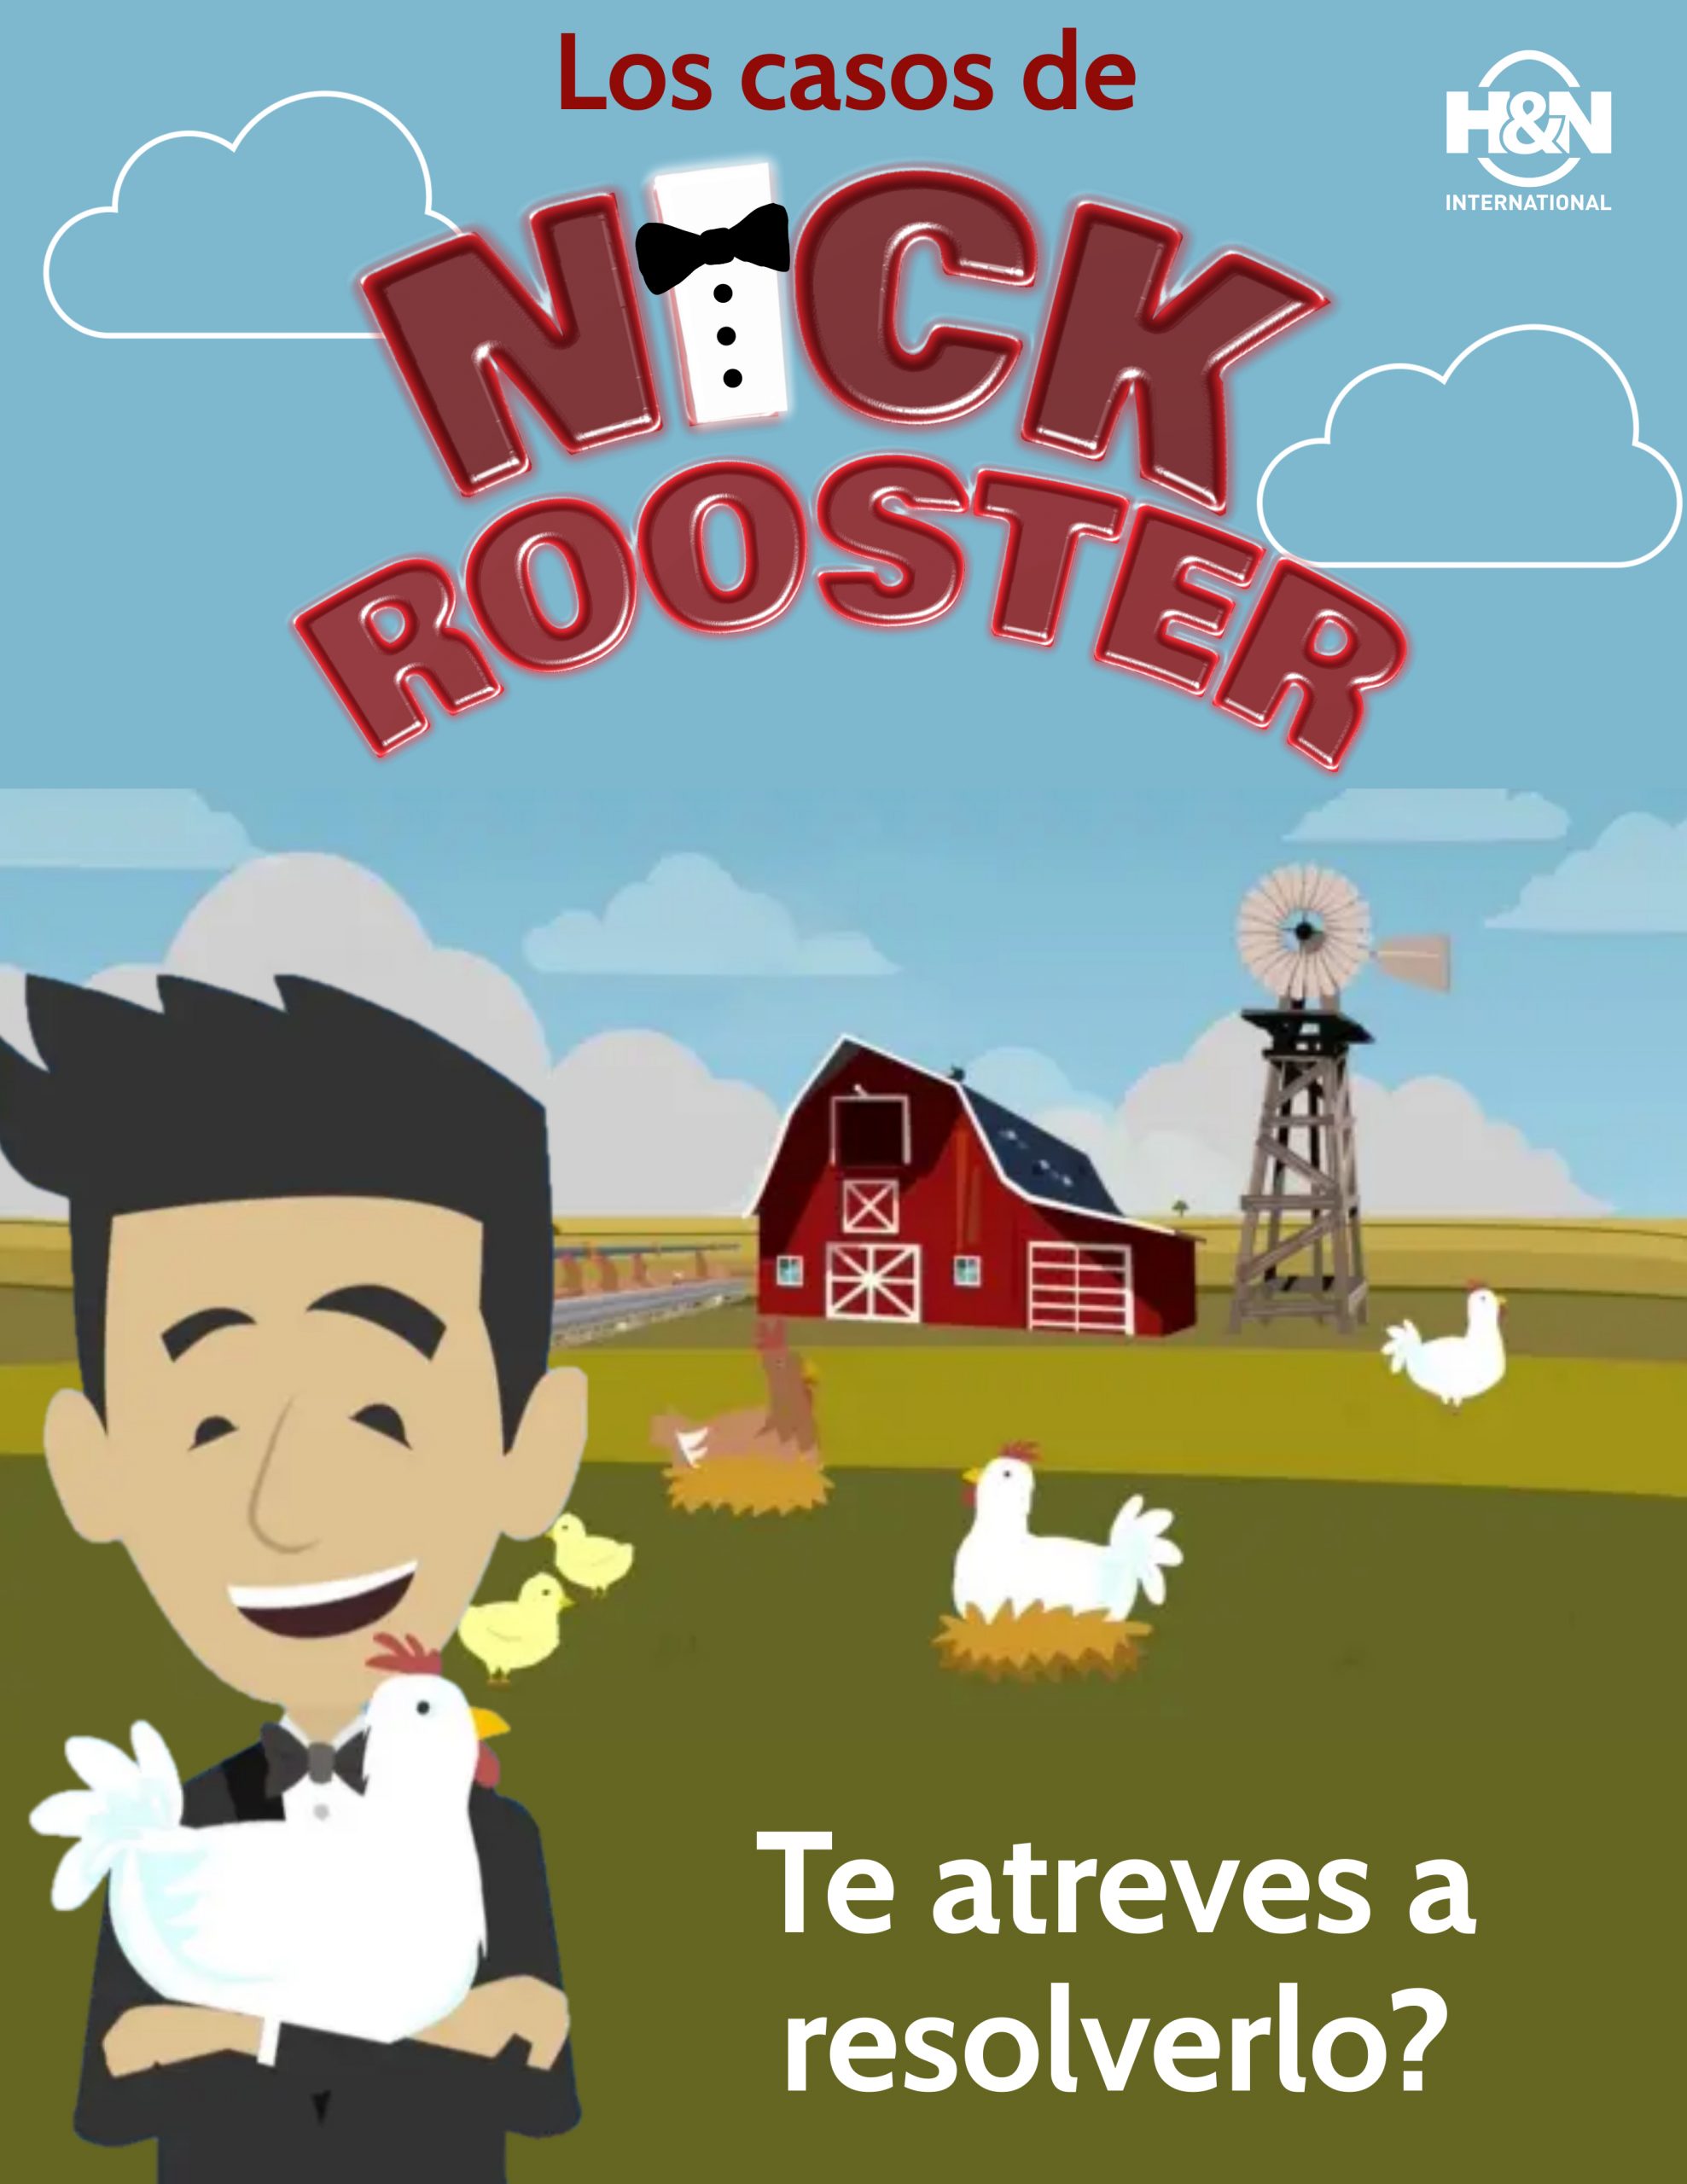 Nick Rooster caso num. 1